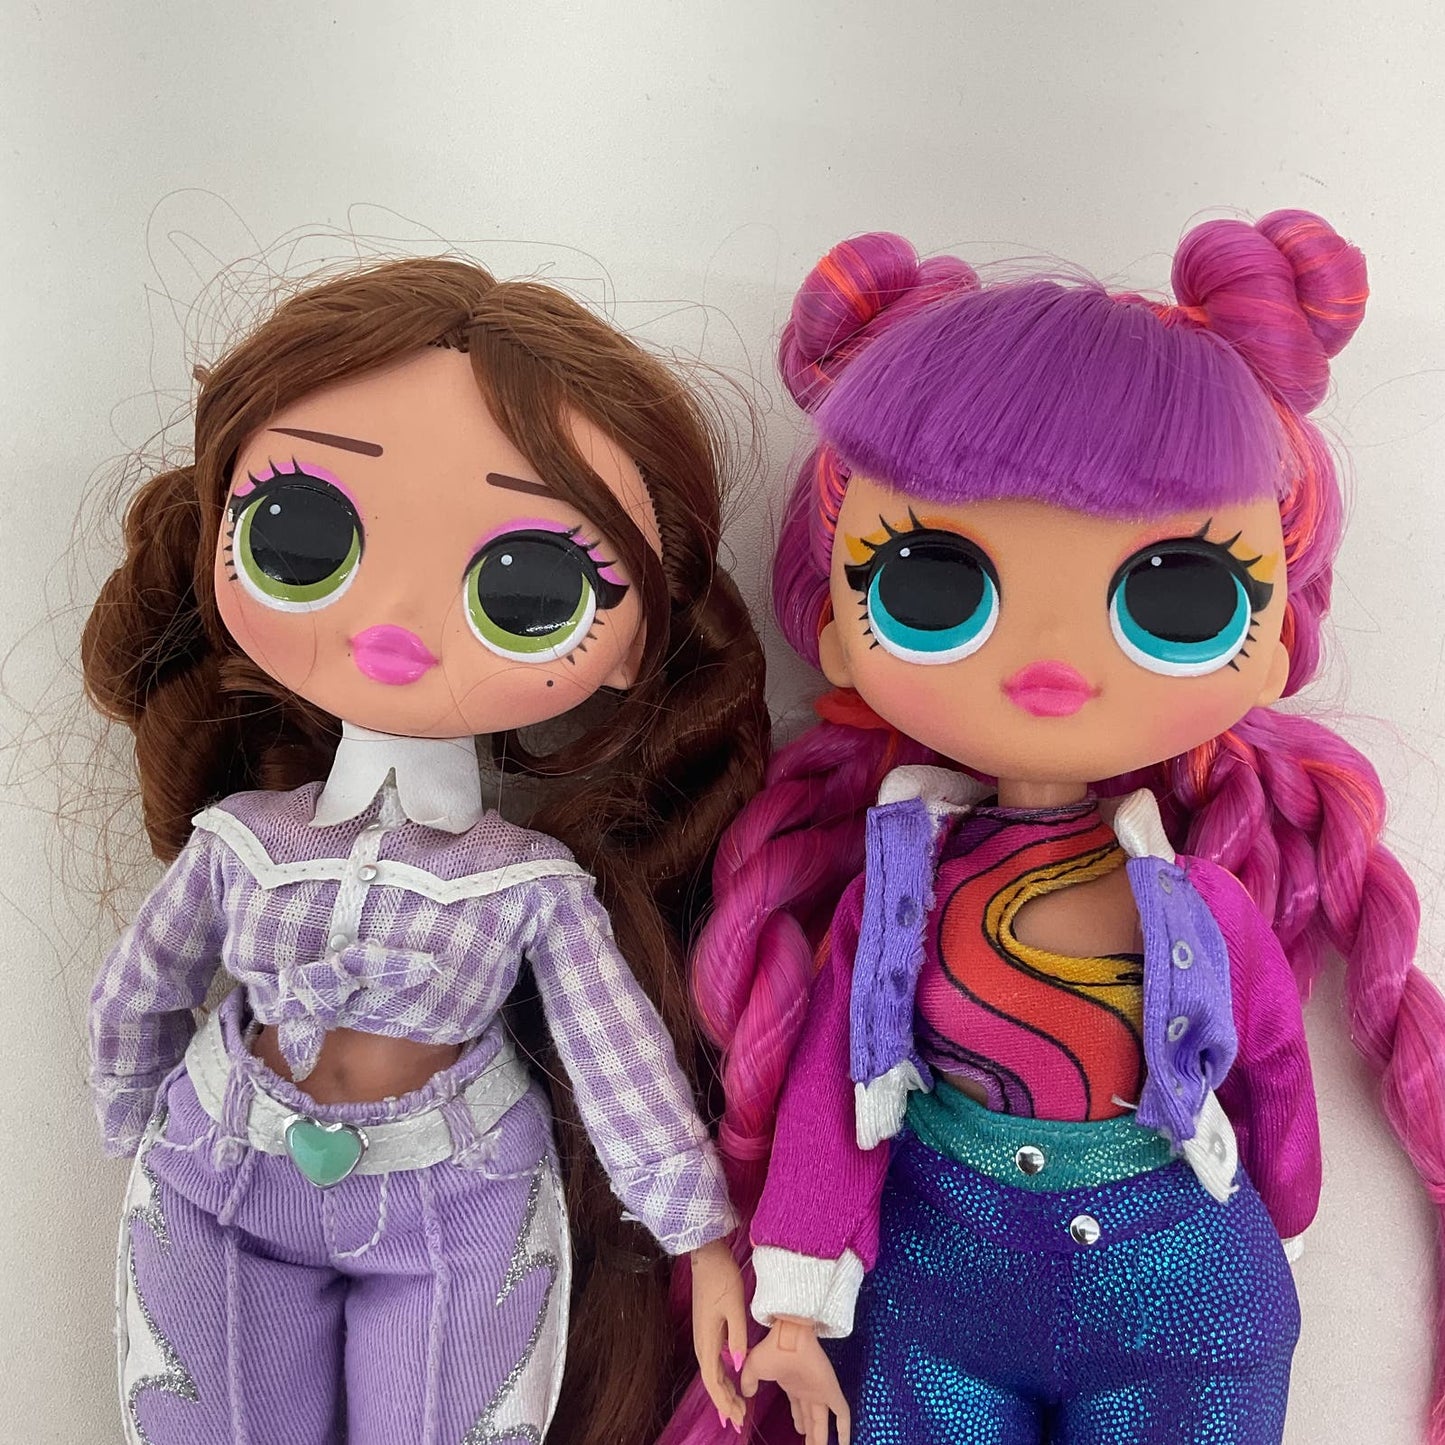 MGA LOL OMG Surprise! Big Sista Fashion Dolls in Clothing Used Pink Hair - Warehouse Toys